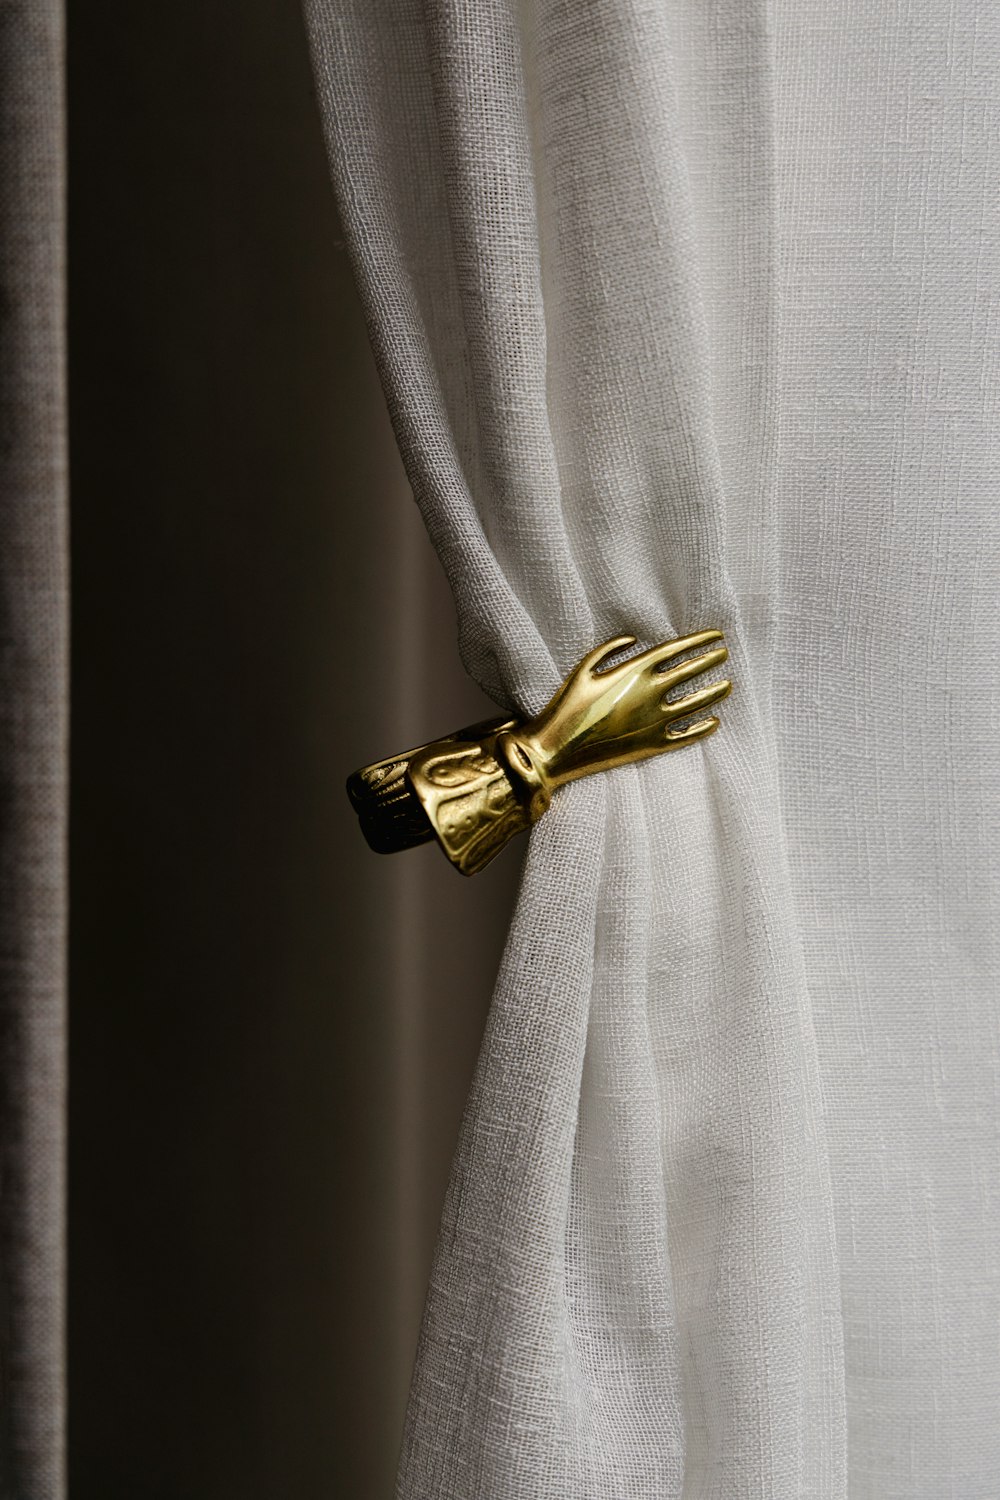 a curtain with a gold glove on it